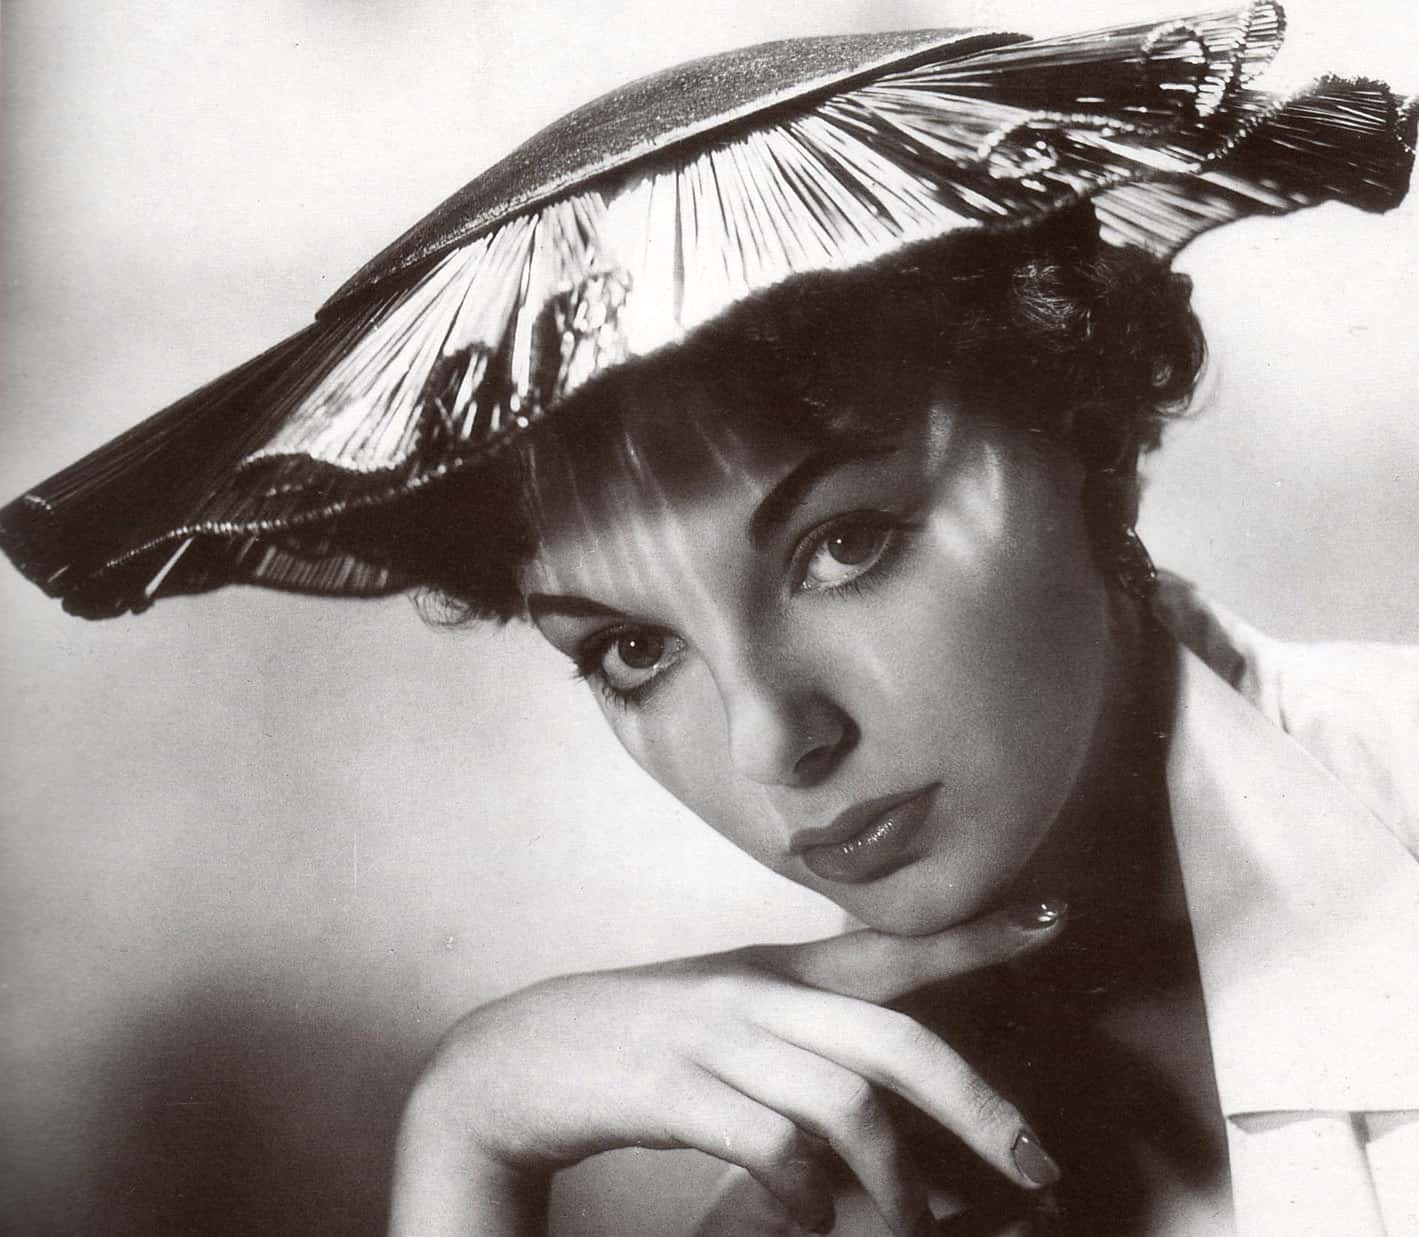 Saucy Facts About Joan Collins, The Queen Of All Things Naughty